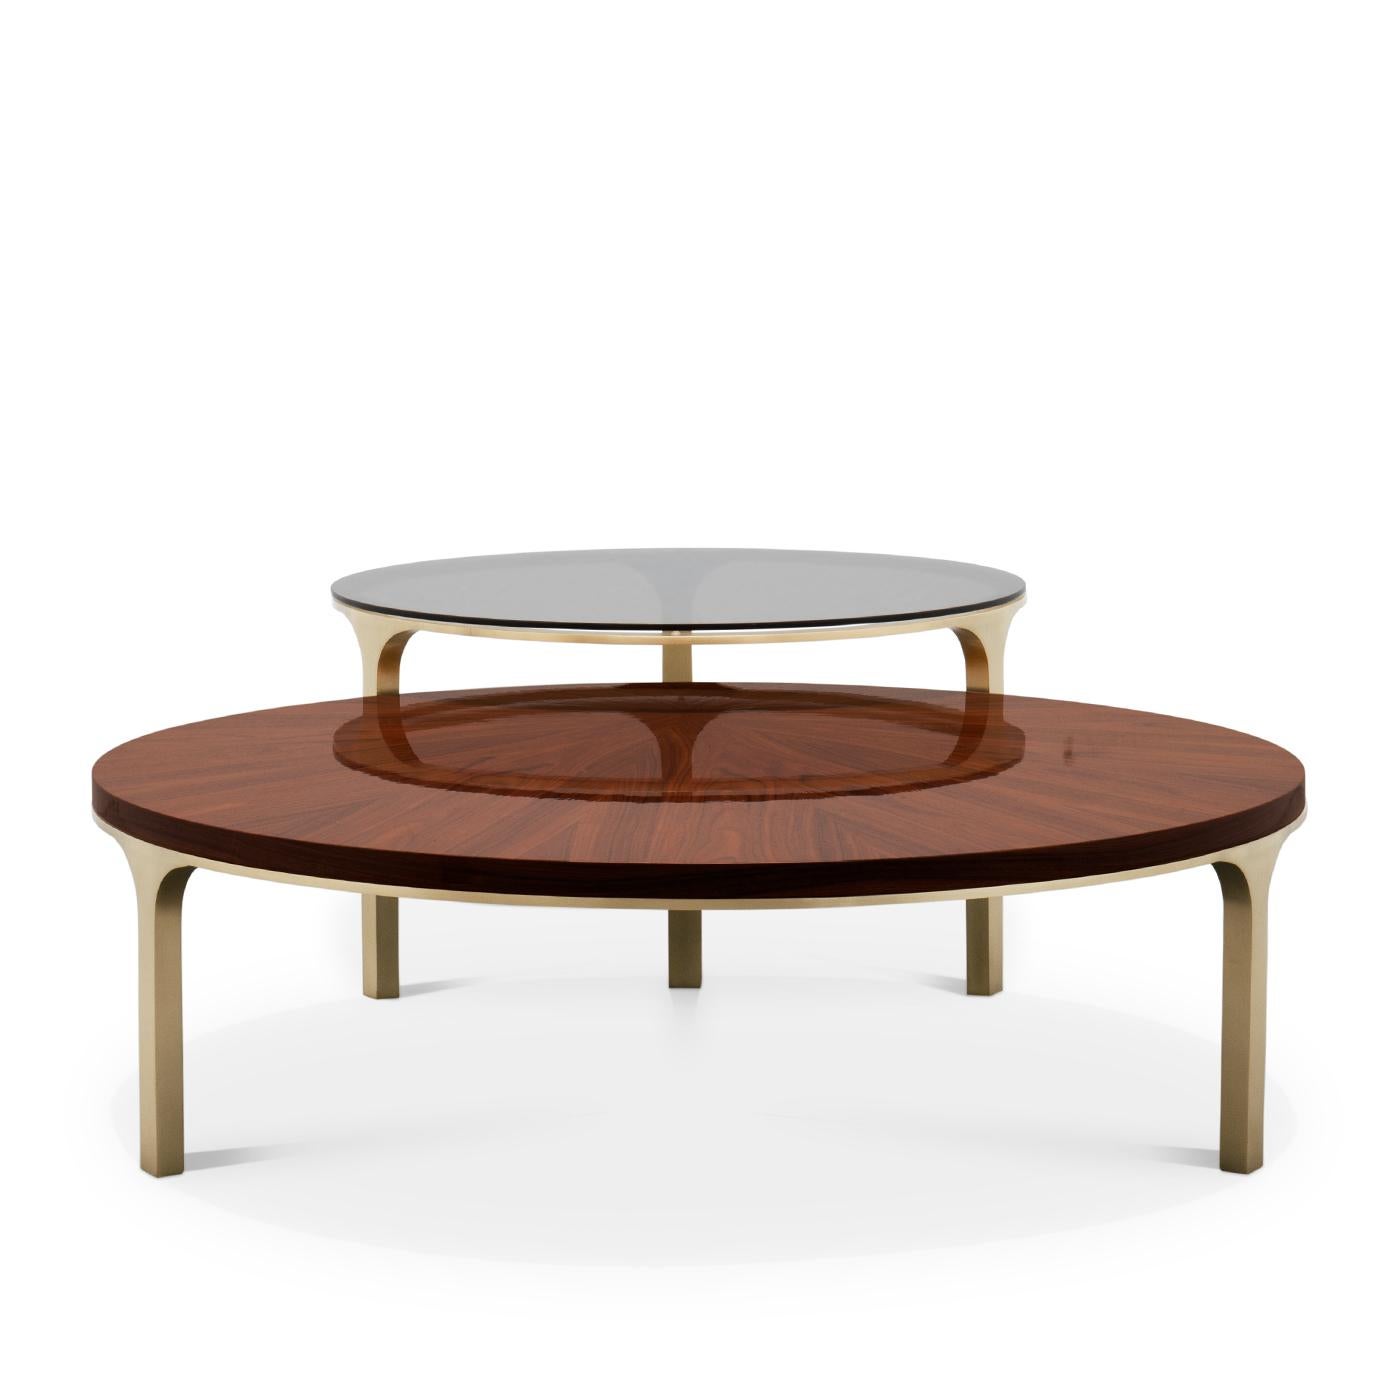 Portuguese Step Set of 2 Coffee Table For Sale